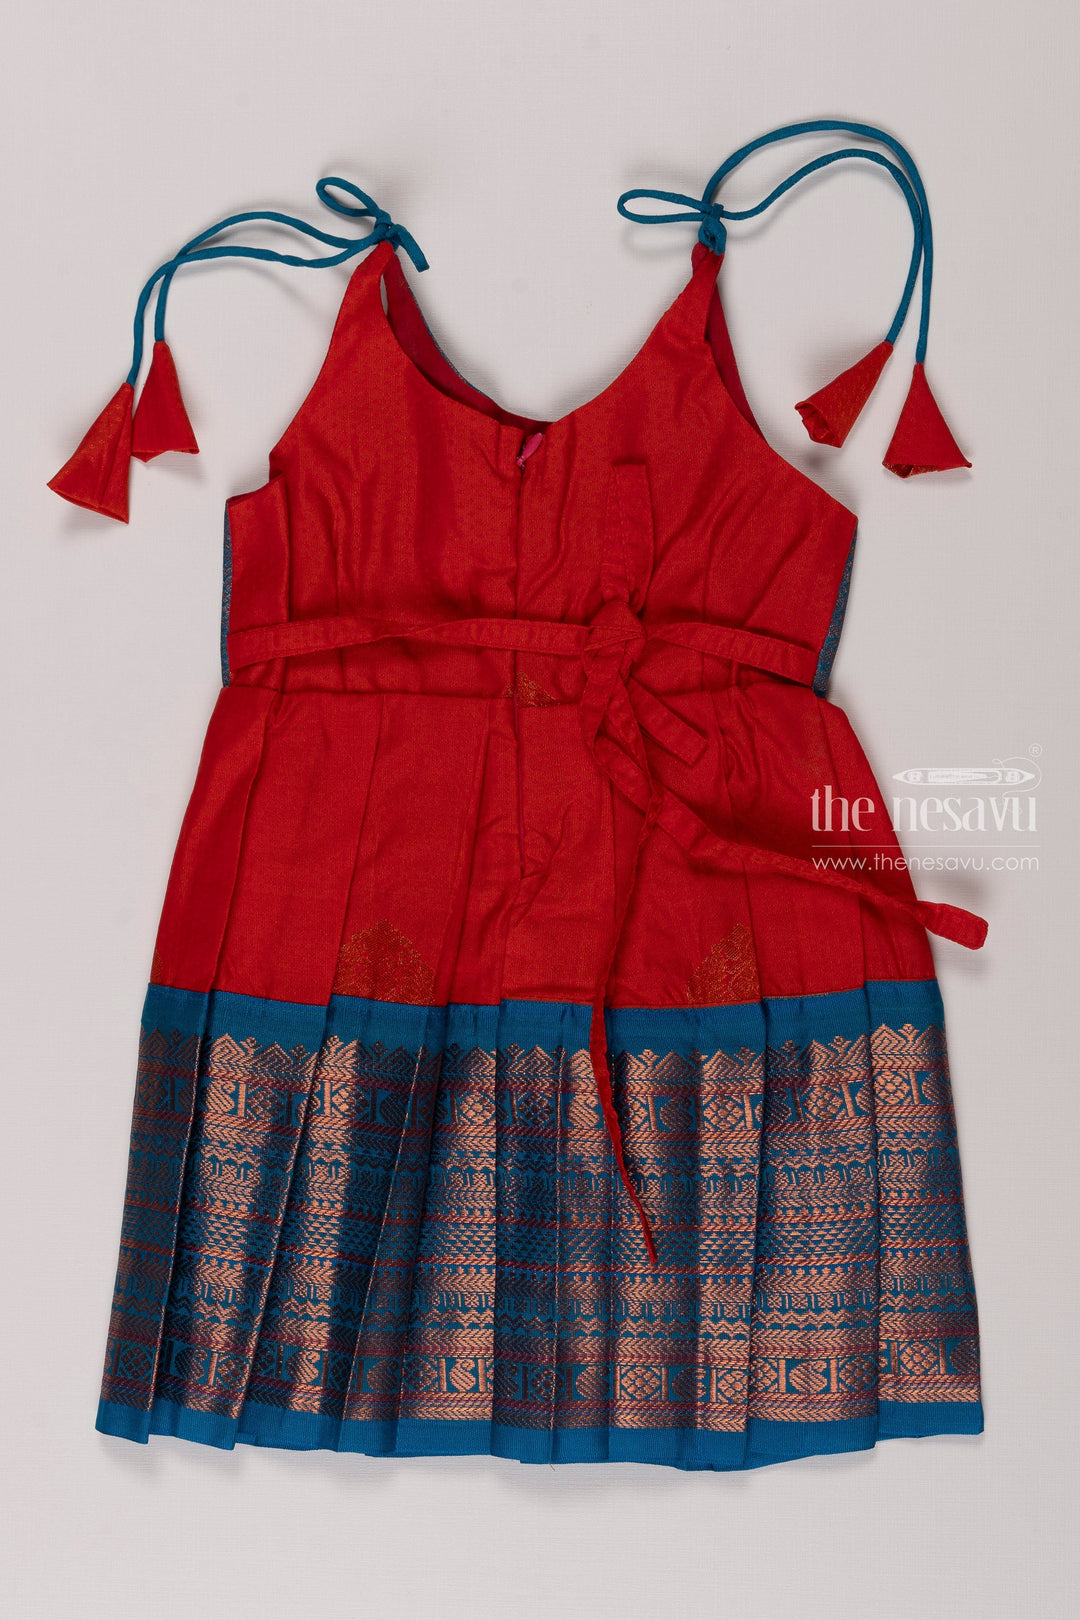 The Nesavu Tie-up Frock Chic Blue and Red Silk Tie-Up Frock for Girls Nesavu Traditional Silk Dress for Kids | Festive Tie Up Silk Frock | The Nesavu